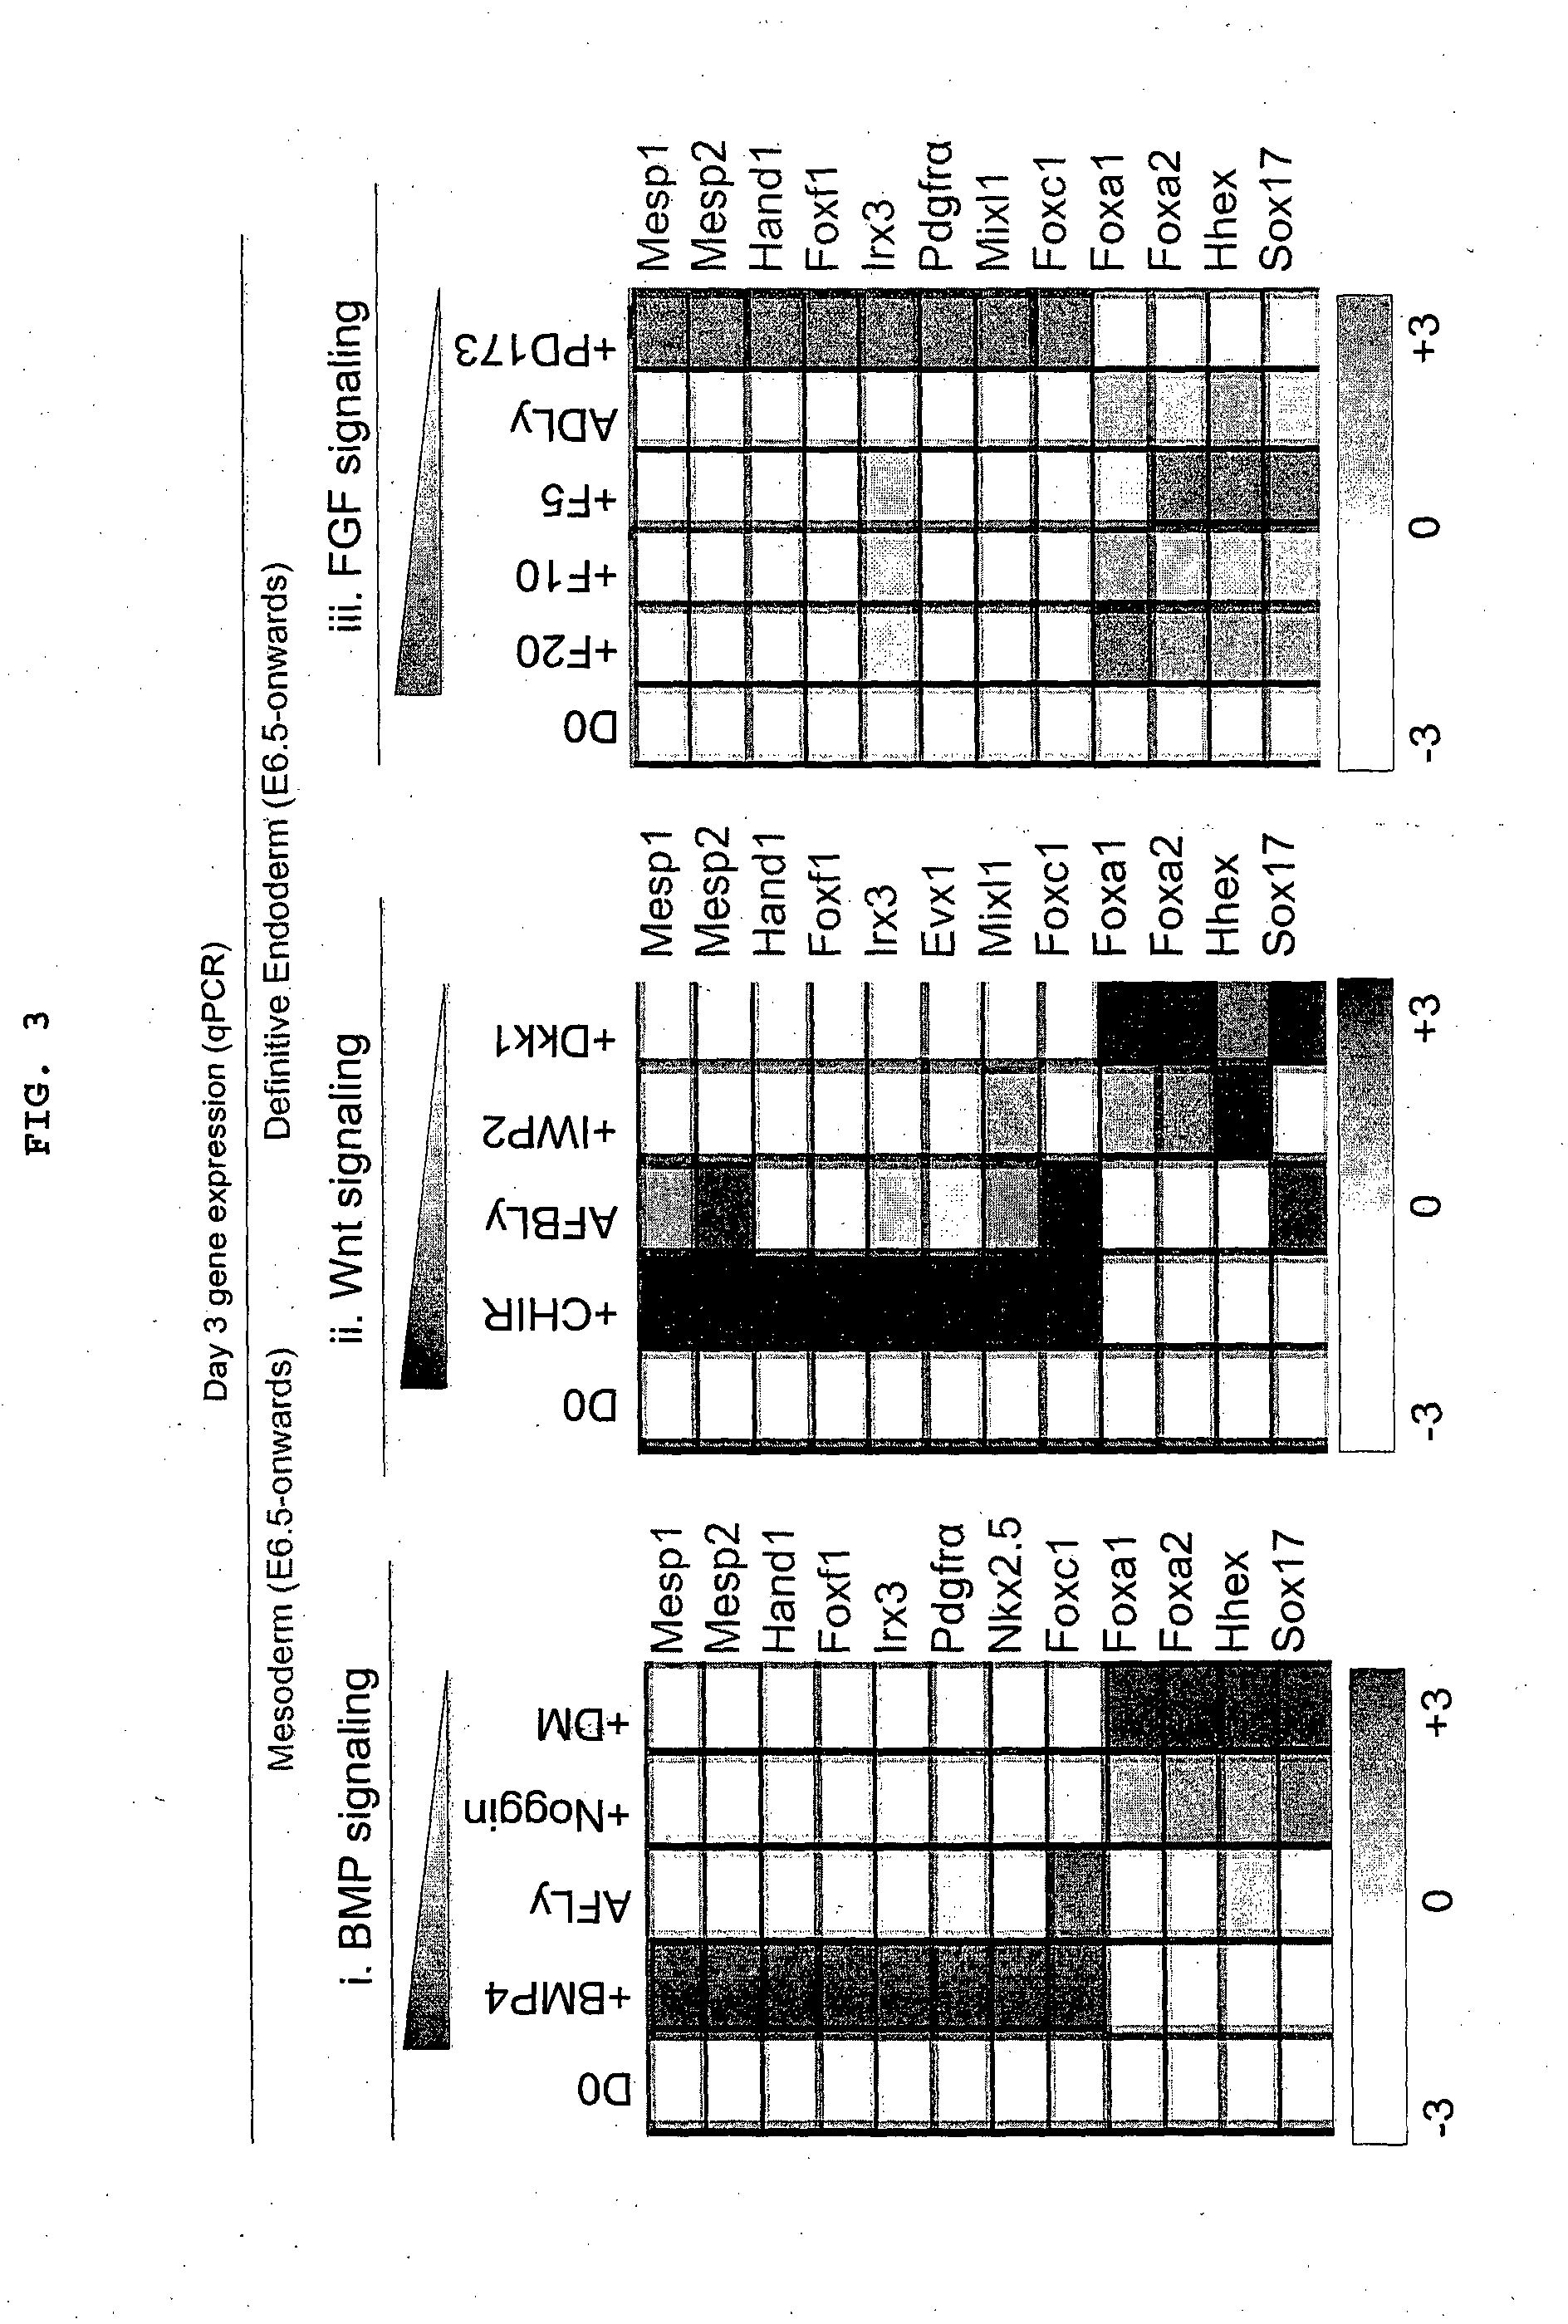 Methods of differentiating stem cells into one or more cell lineages